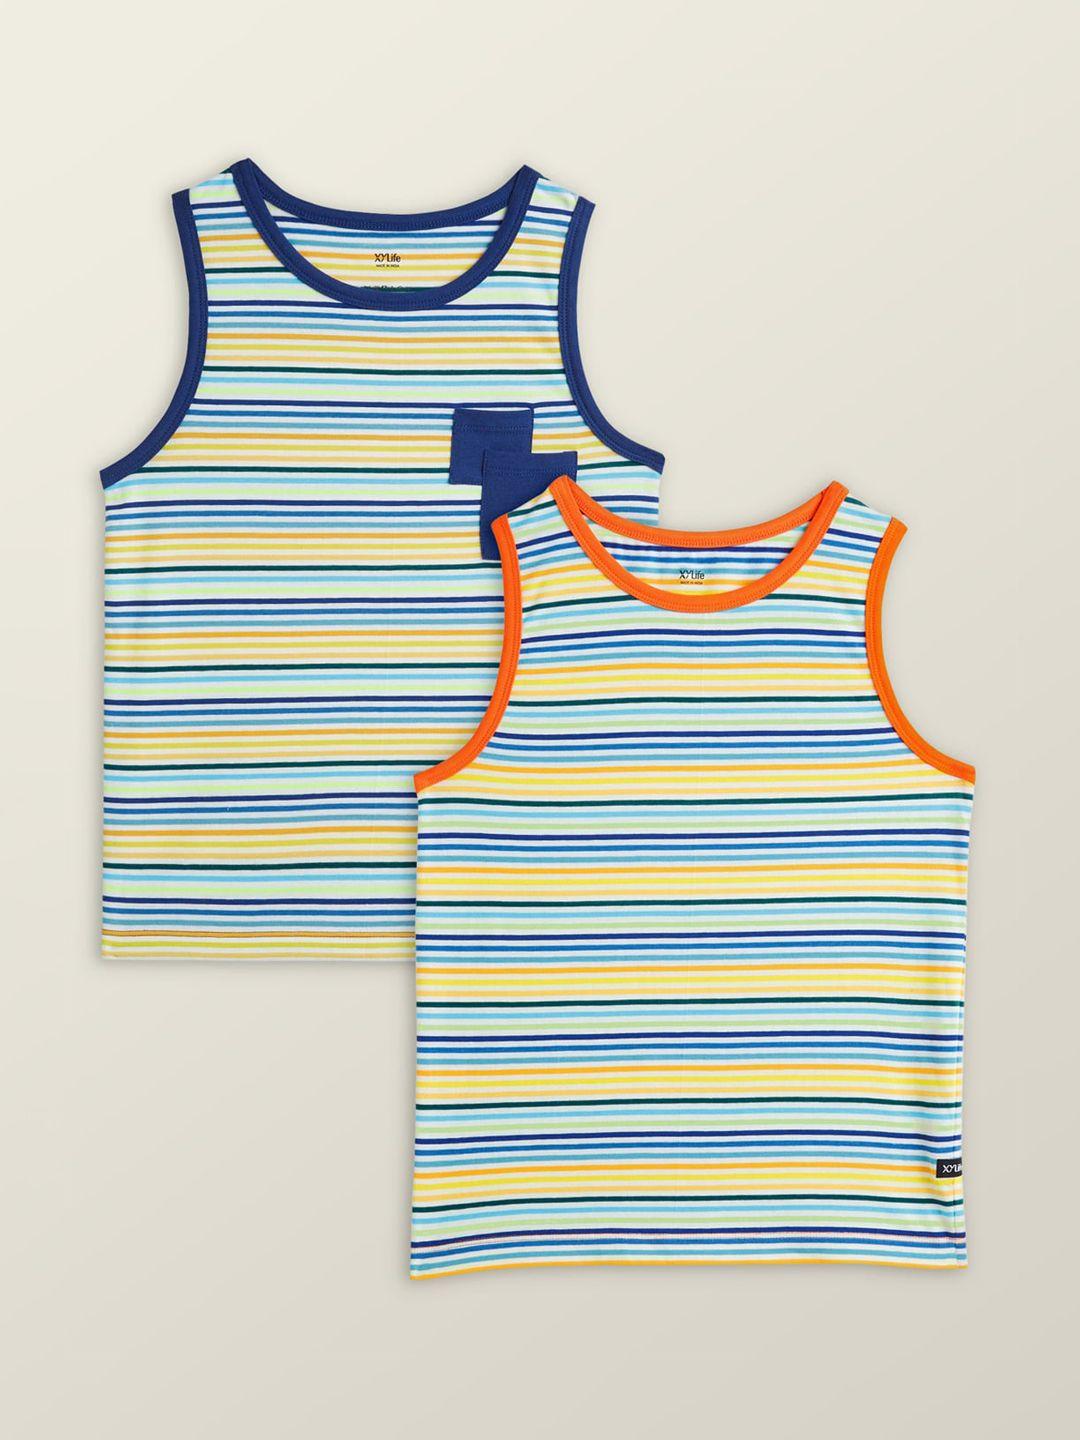 xy life boys pack of 2 striped combed cotton innerwear vests